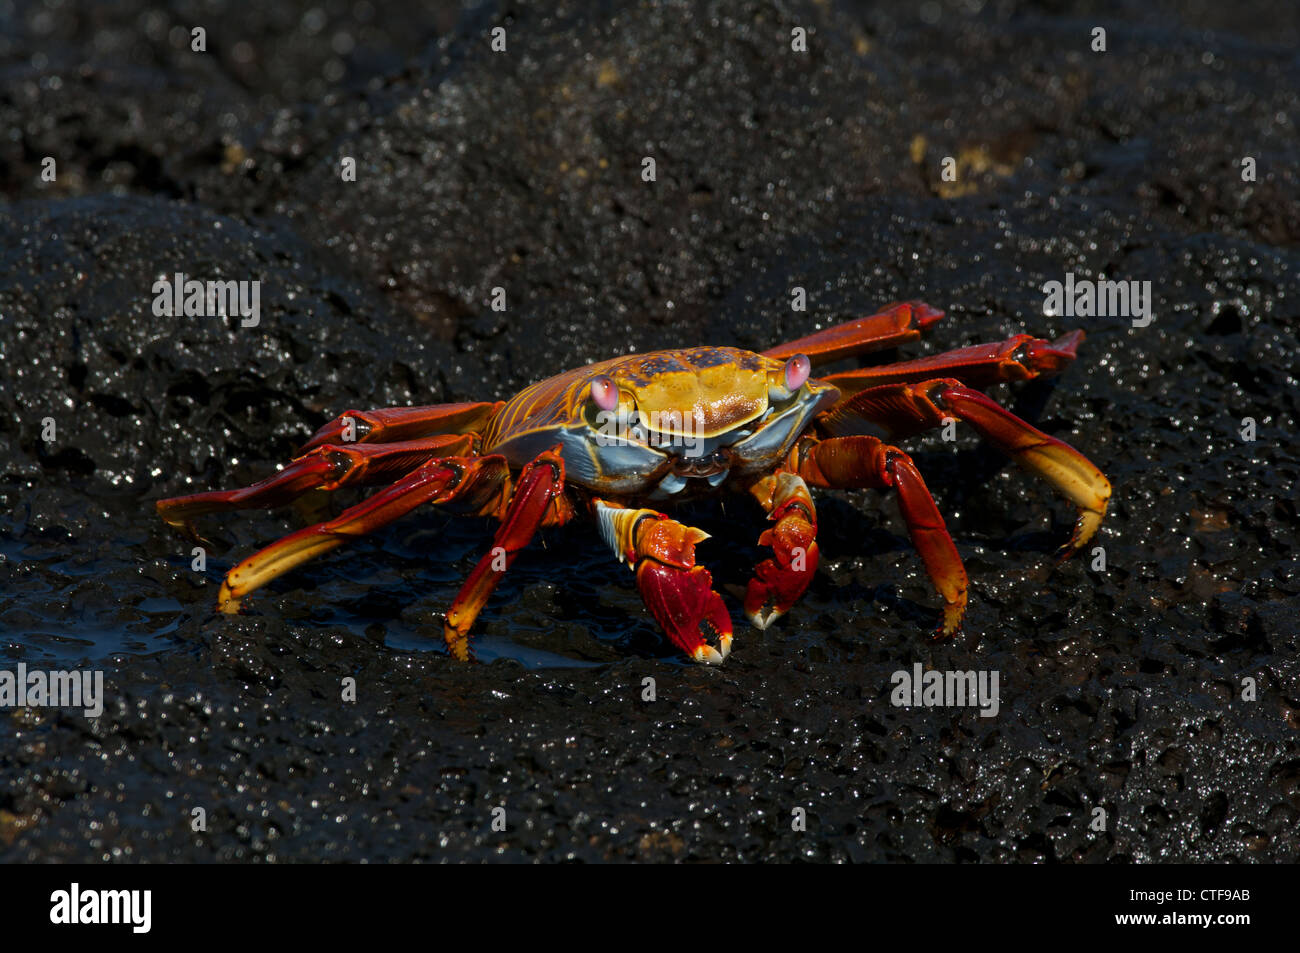 A Sally Lightfoot Crab (Grapsus grapsus) on the volcanic shoreline of Sombrero Chino Islet in the Galapagos Islands, Ecuador. Stock Photo